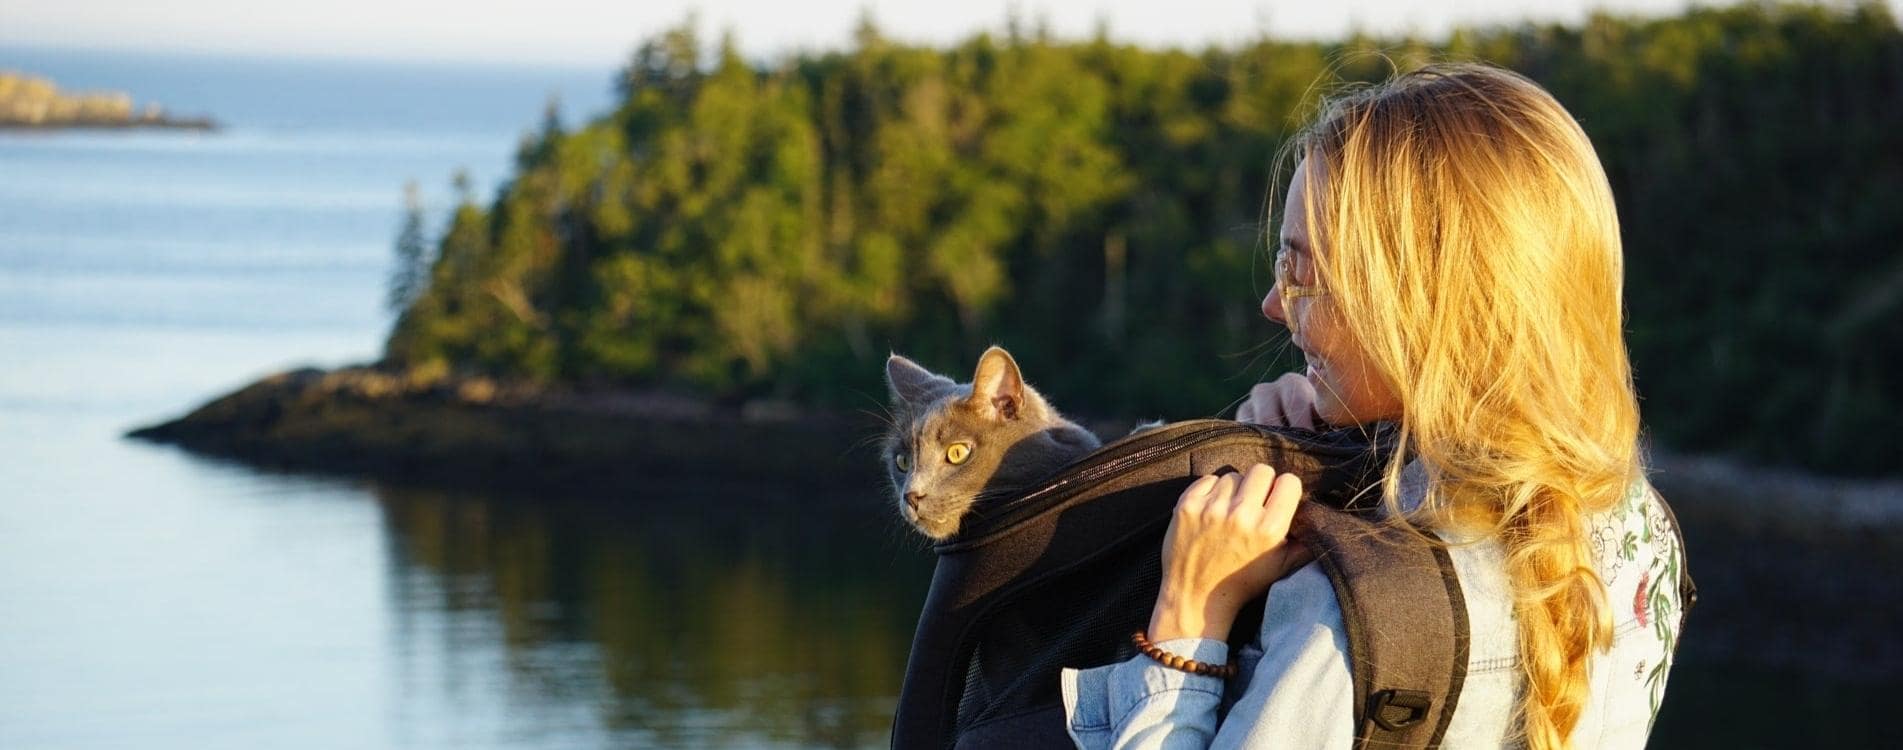 blonde woman hiking with her cat in a cat backpack